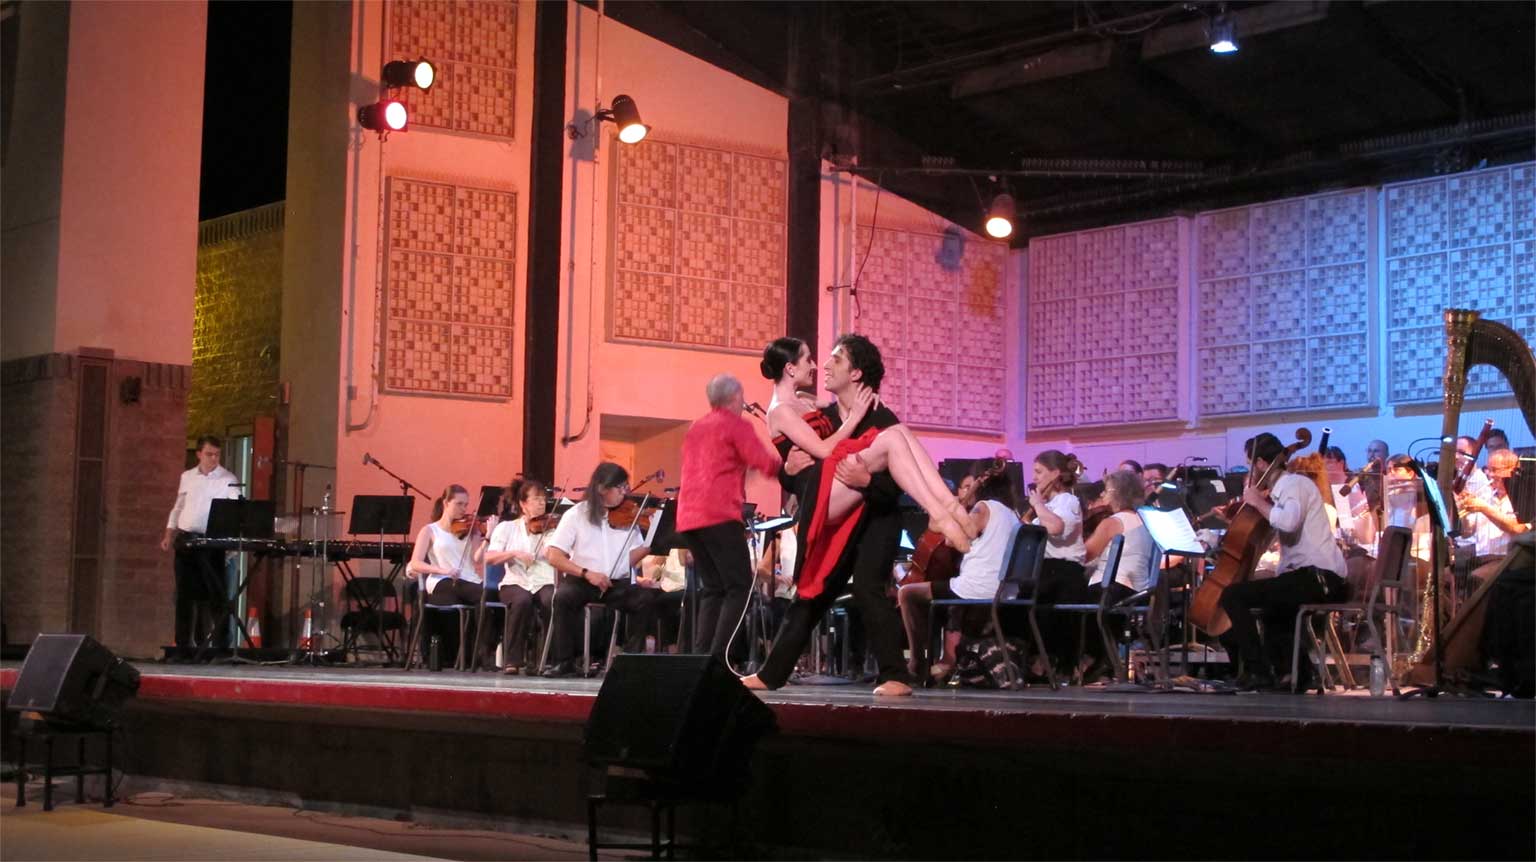 Two dancers on stage with the Tucson Pops Orchestra